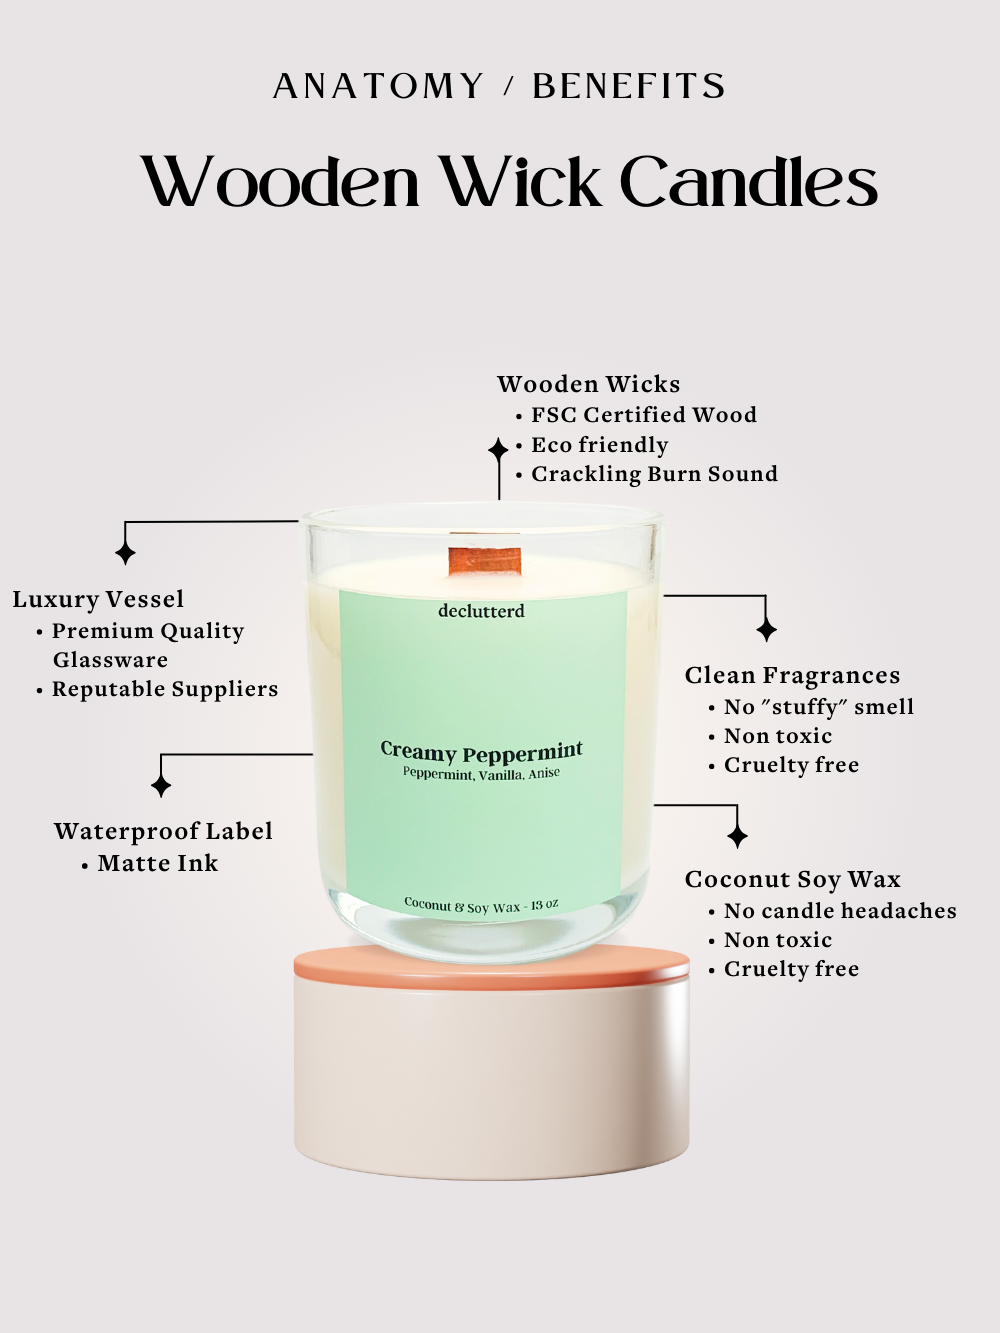 Creamy Peppermint Wood Wick Candle, Benefits and Feature